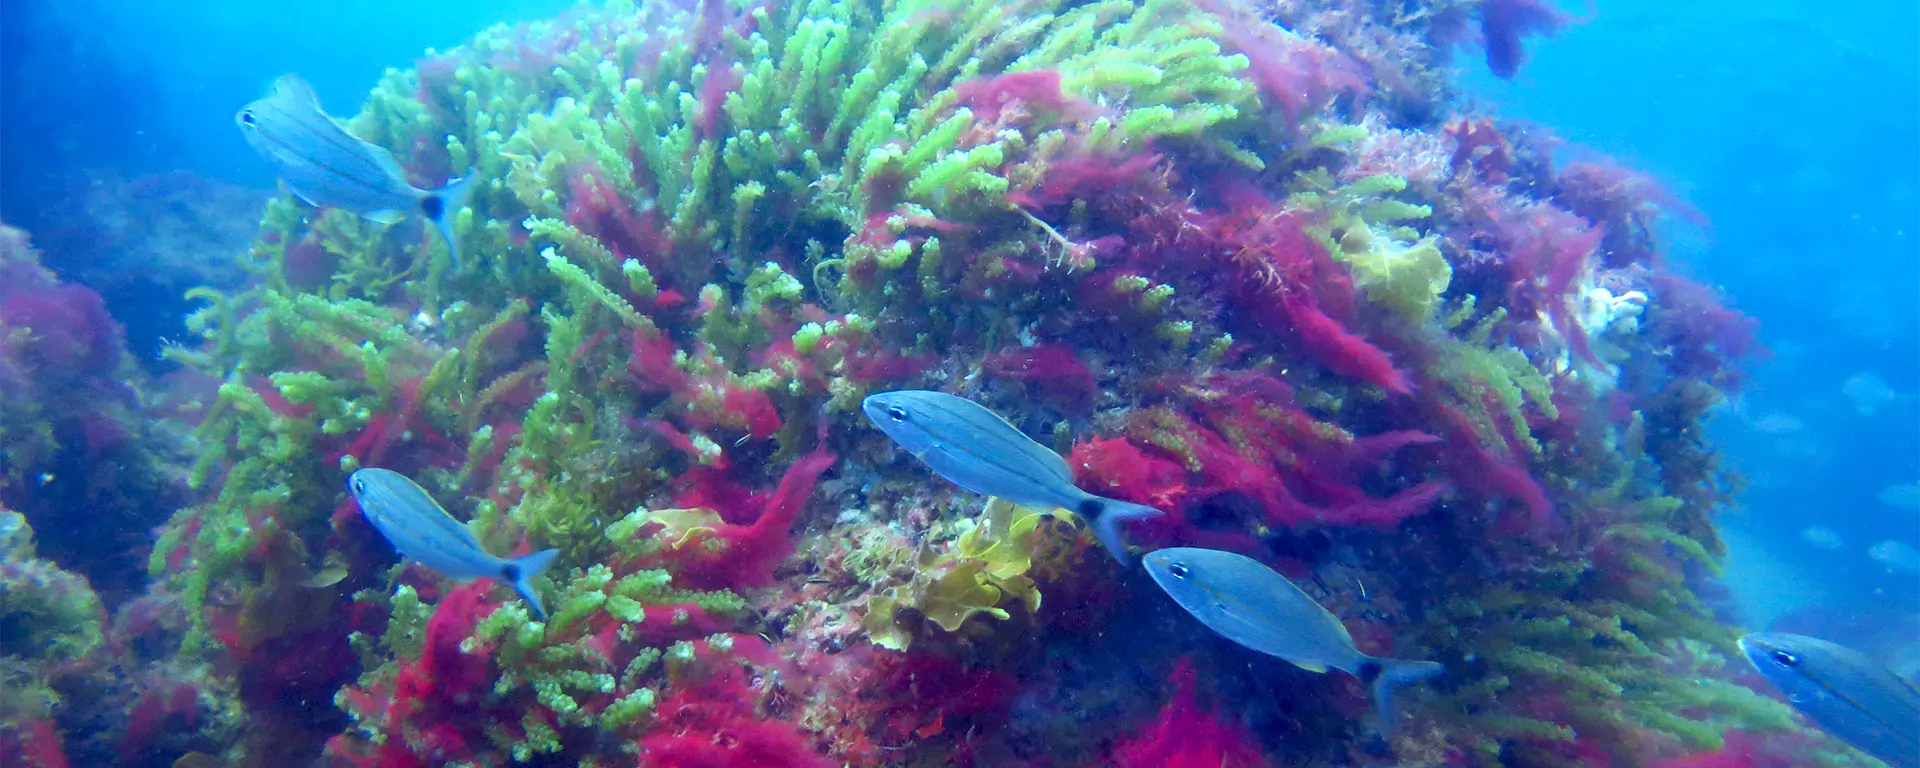 Fish swimming on a coral reef